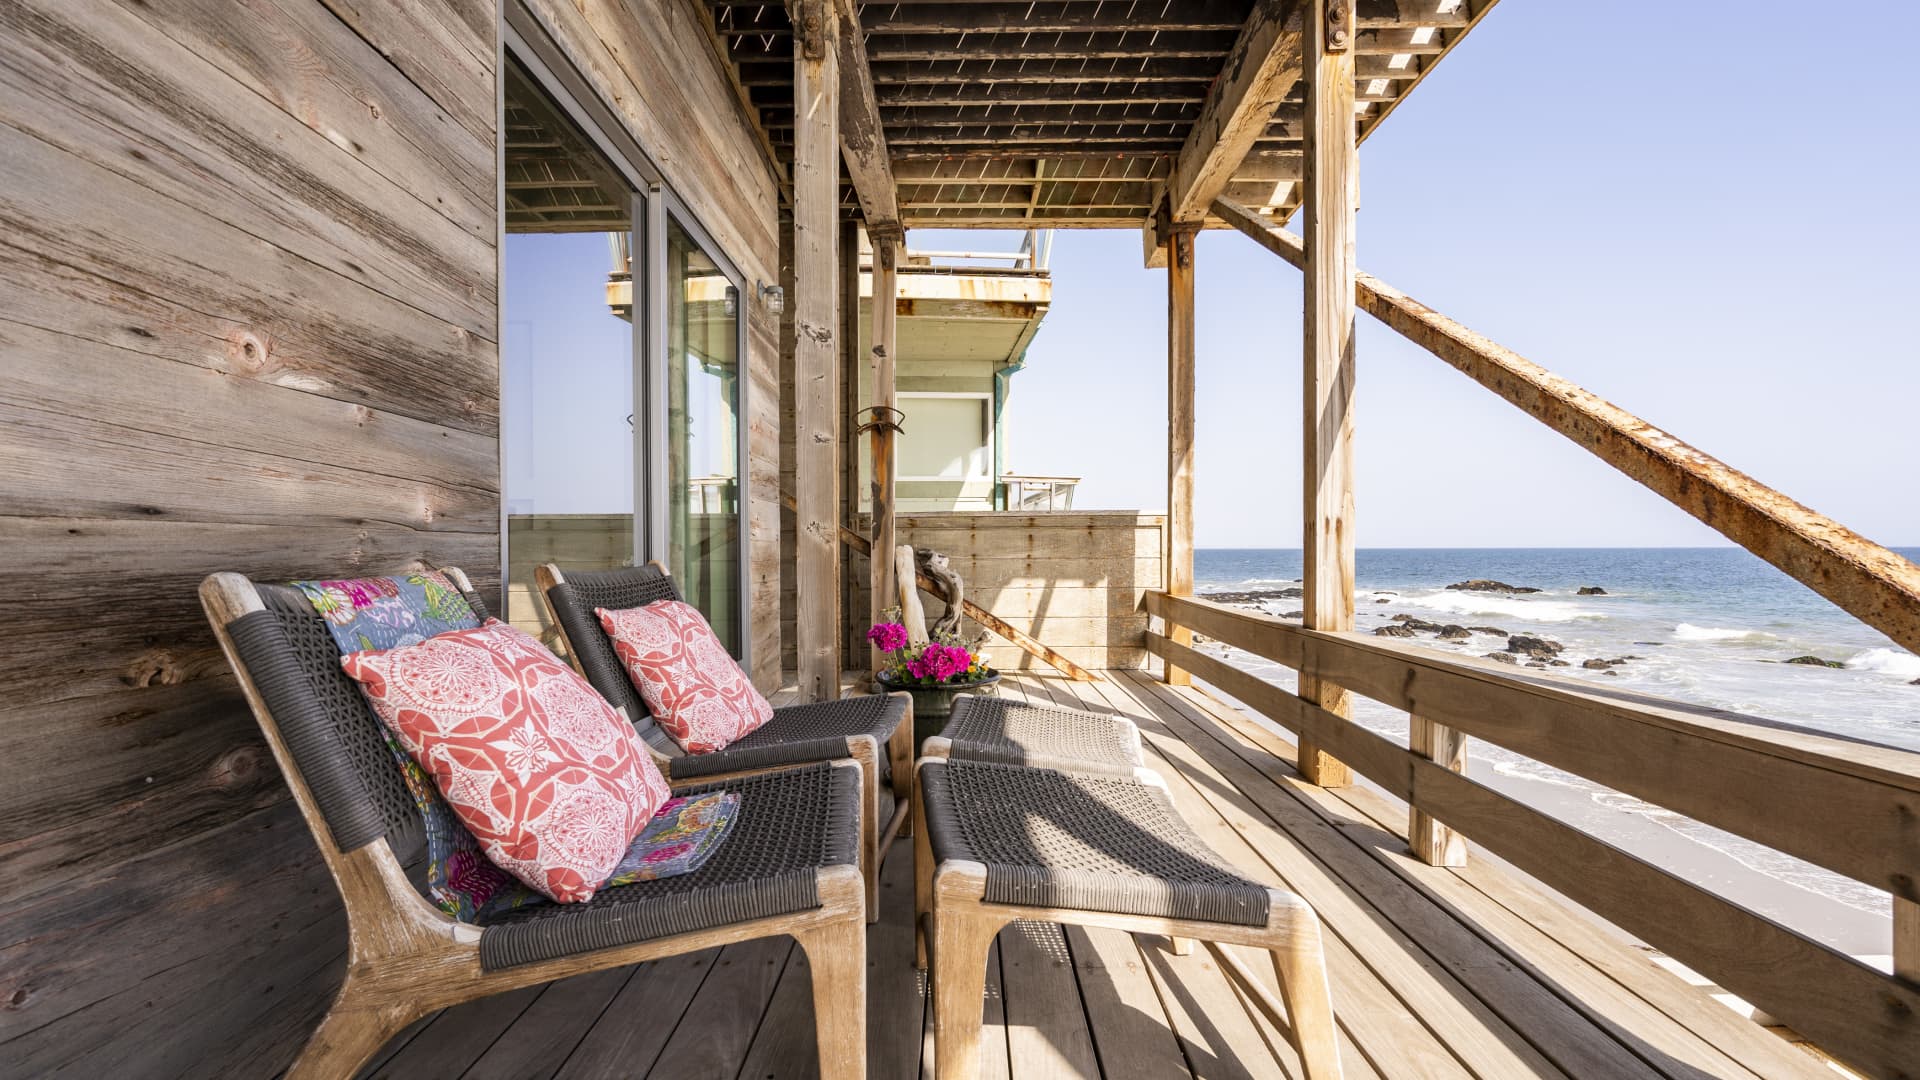 This beachfront apartment accommodates two guests and is in Malibu, California.